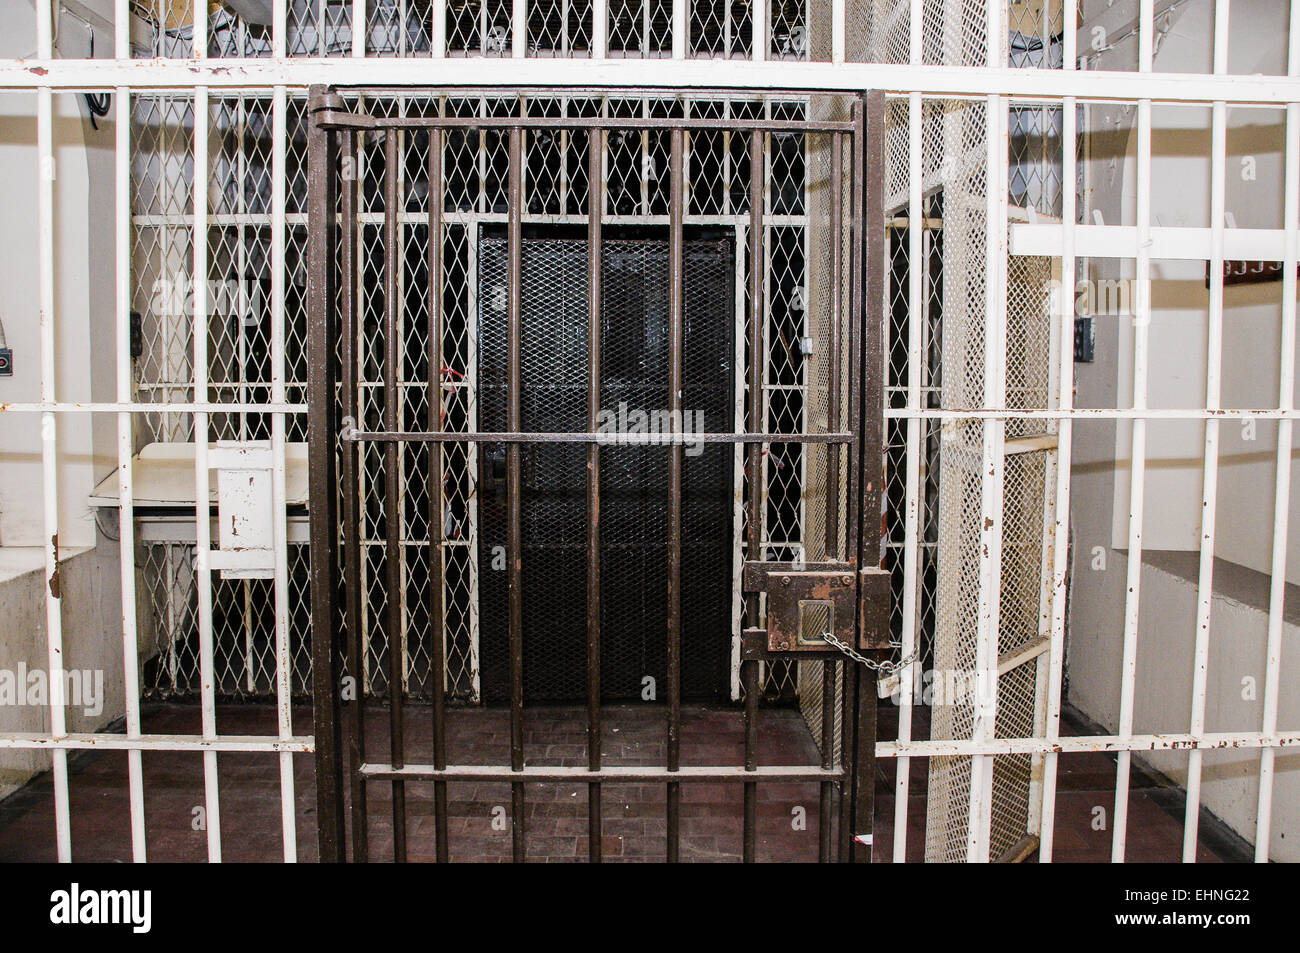 Metal barred gates inside an old prison Stock Photo